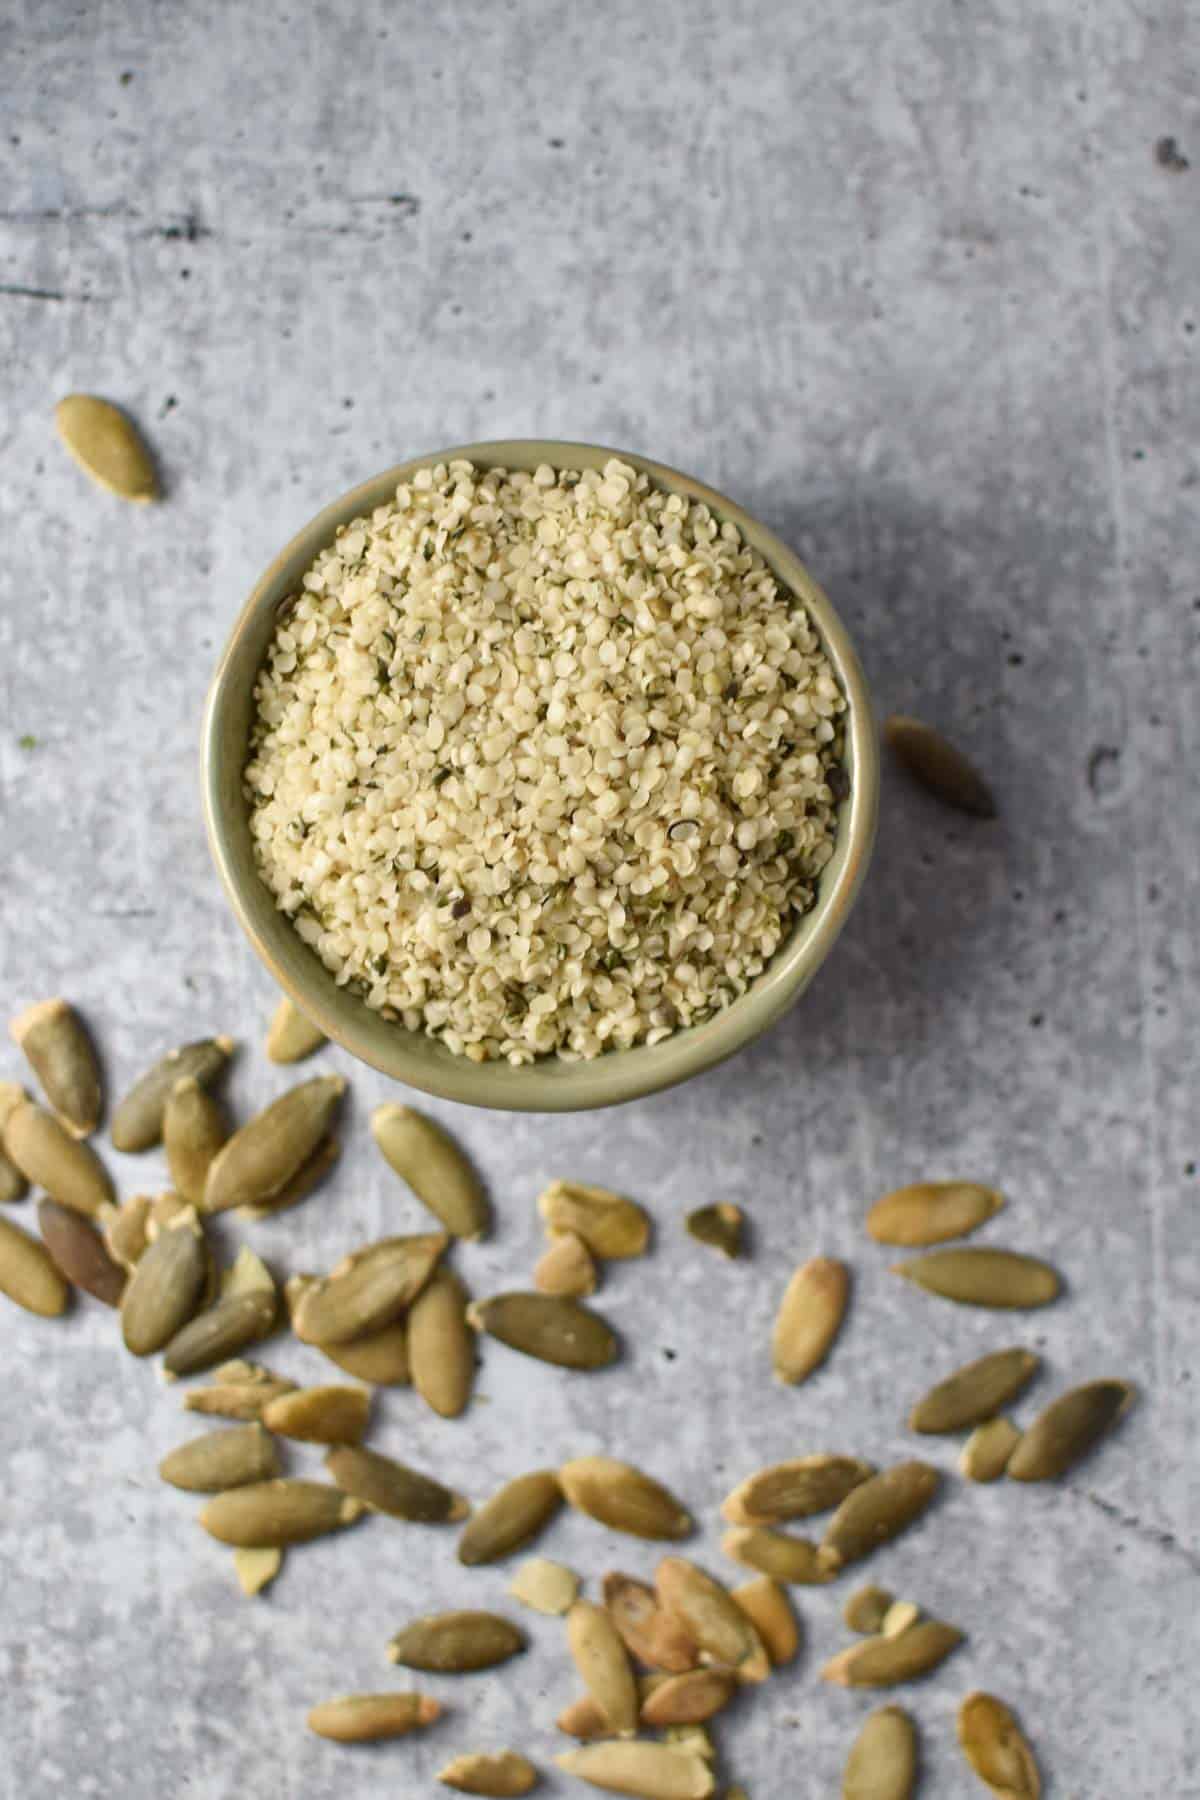 Hemp seeds in a bowl with pepitas.